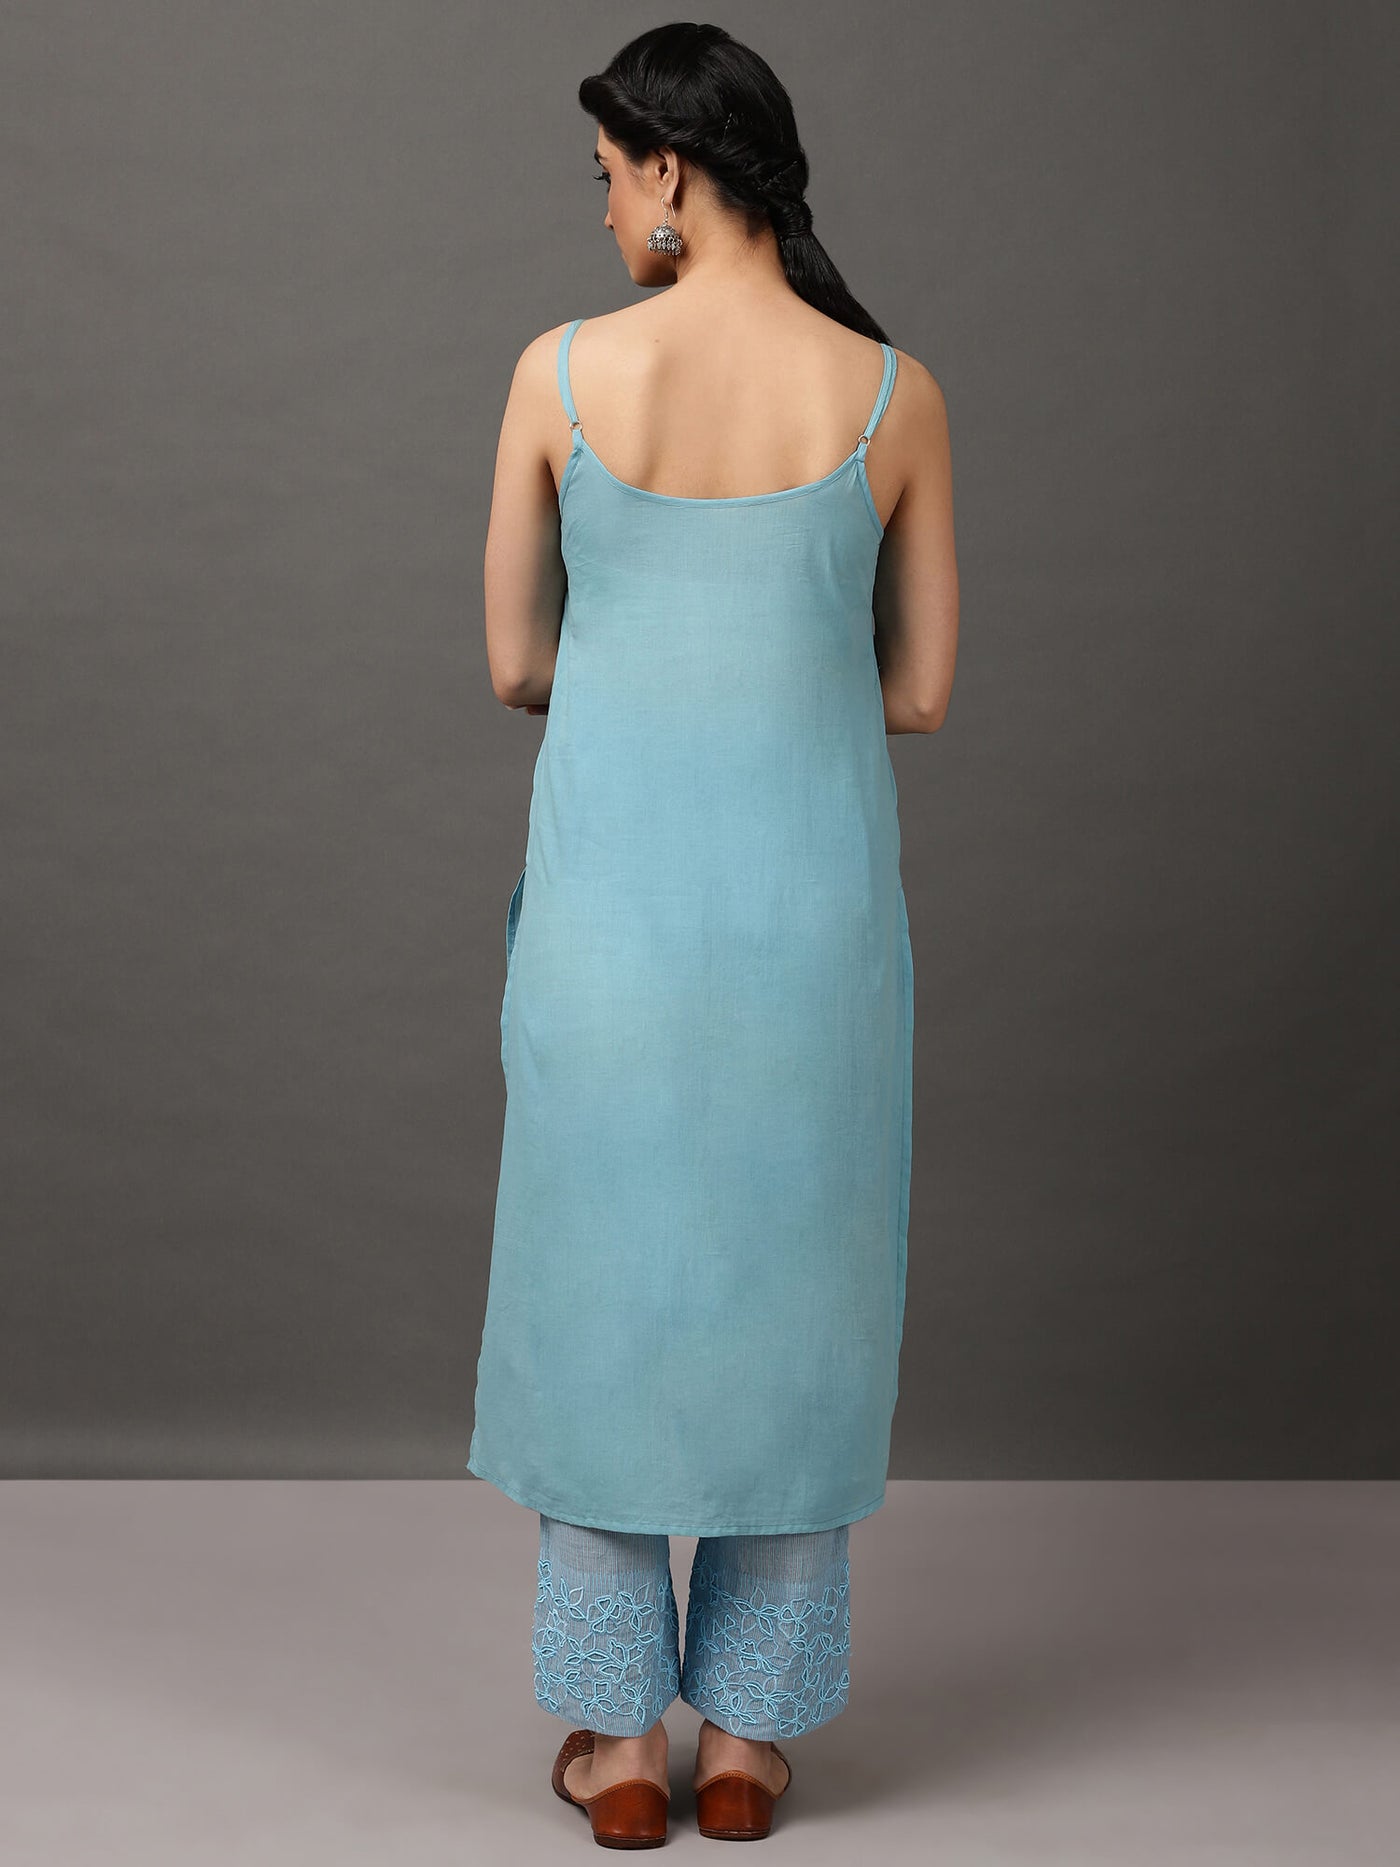 Light Blue Colour Kurta With Hand Embroidery Pant & Camisole